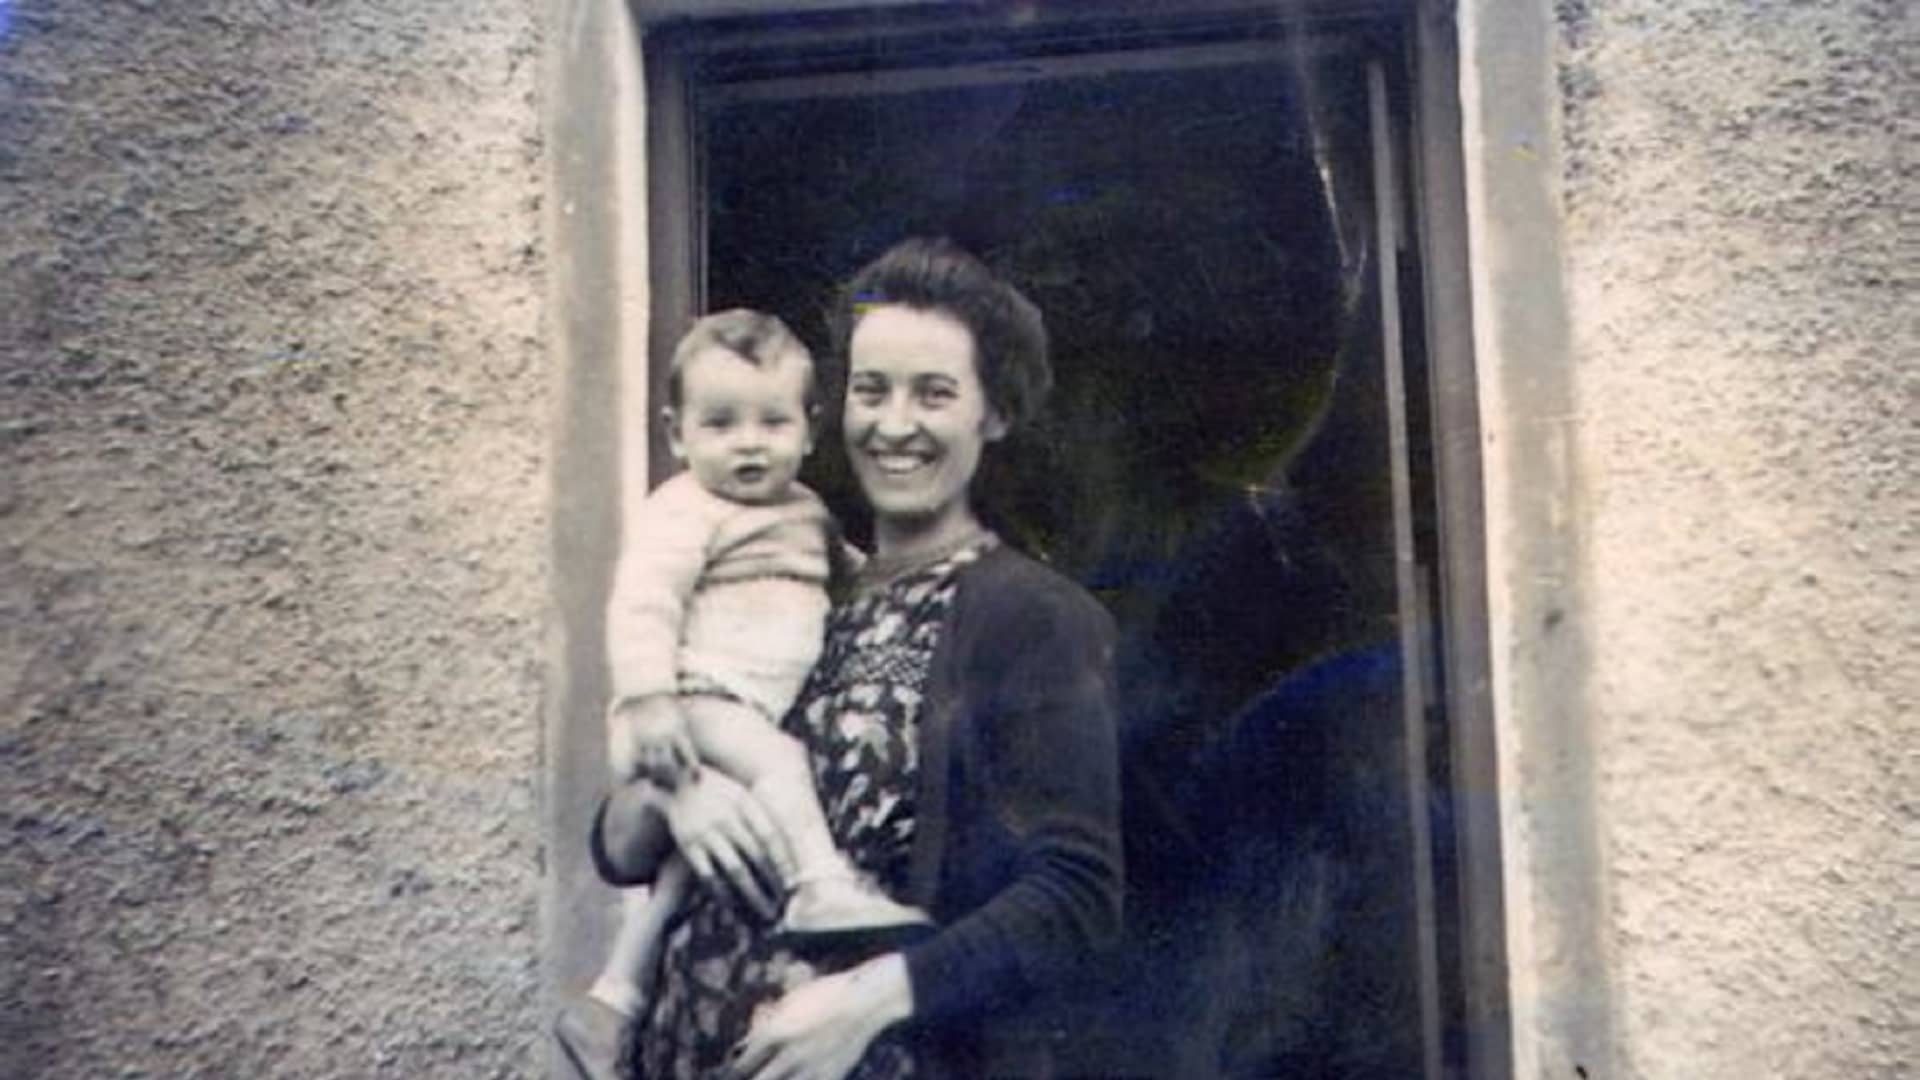 Michael Dowling as a baby, being held by his mother, Meg, in front of their thatched cottage home in Knockaderry, a small village in County Limerick, Ireland.